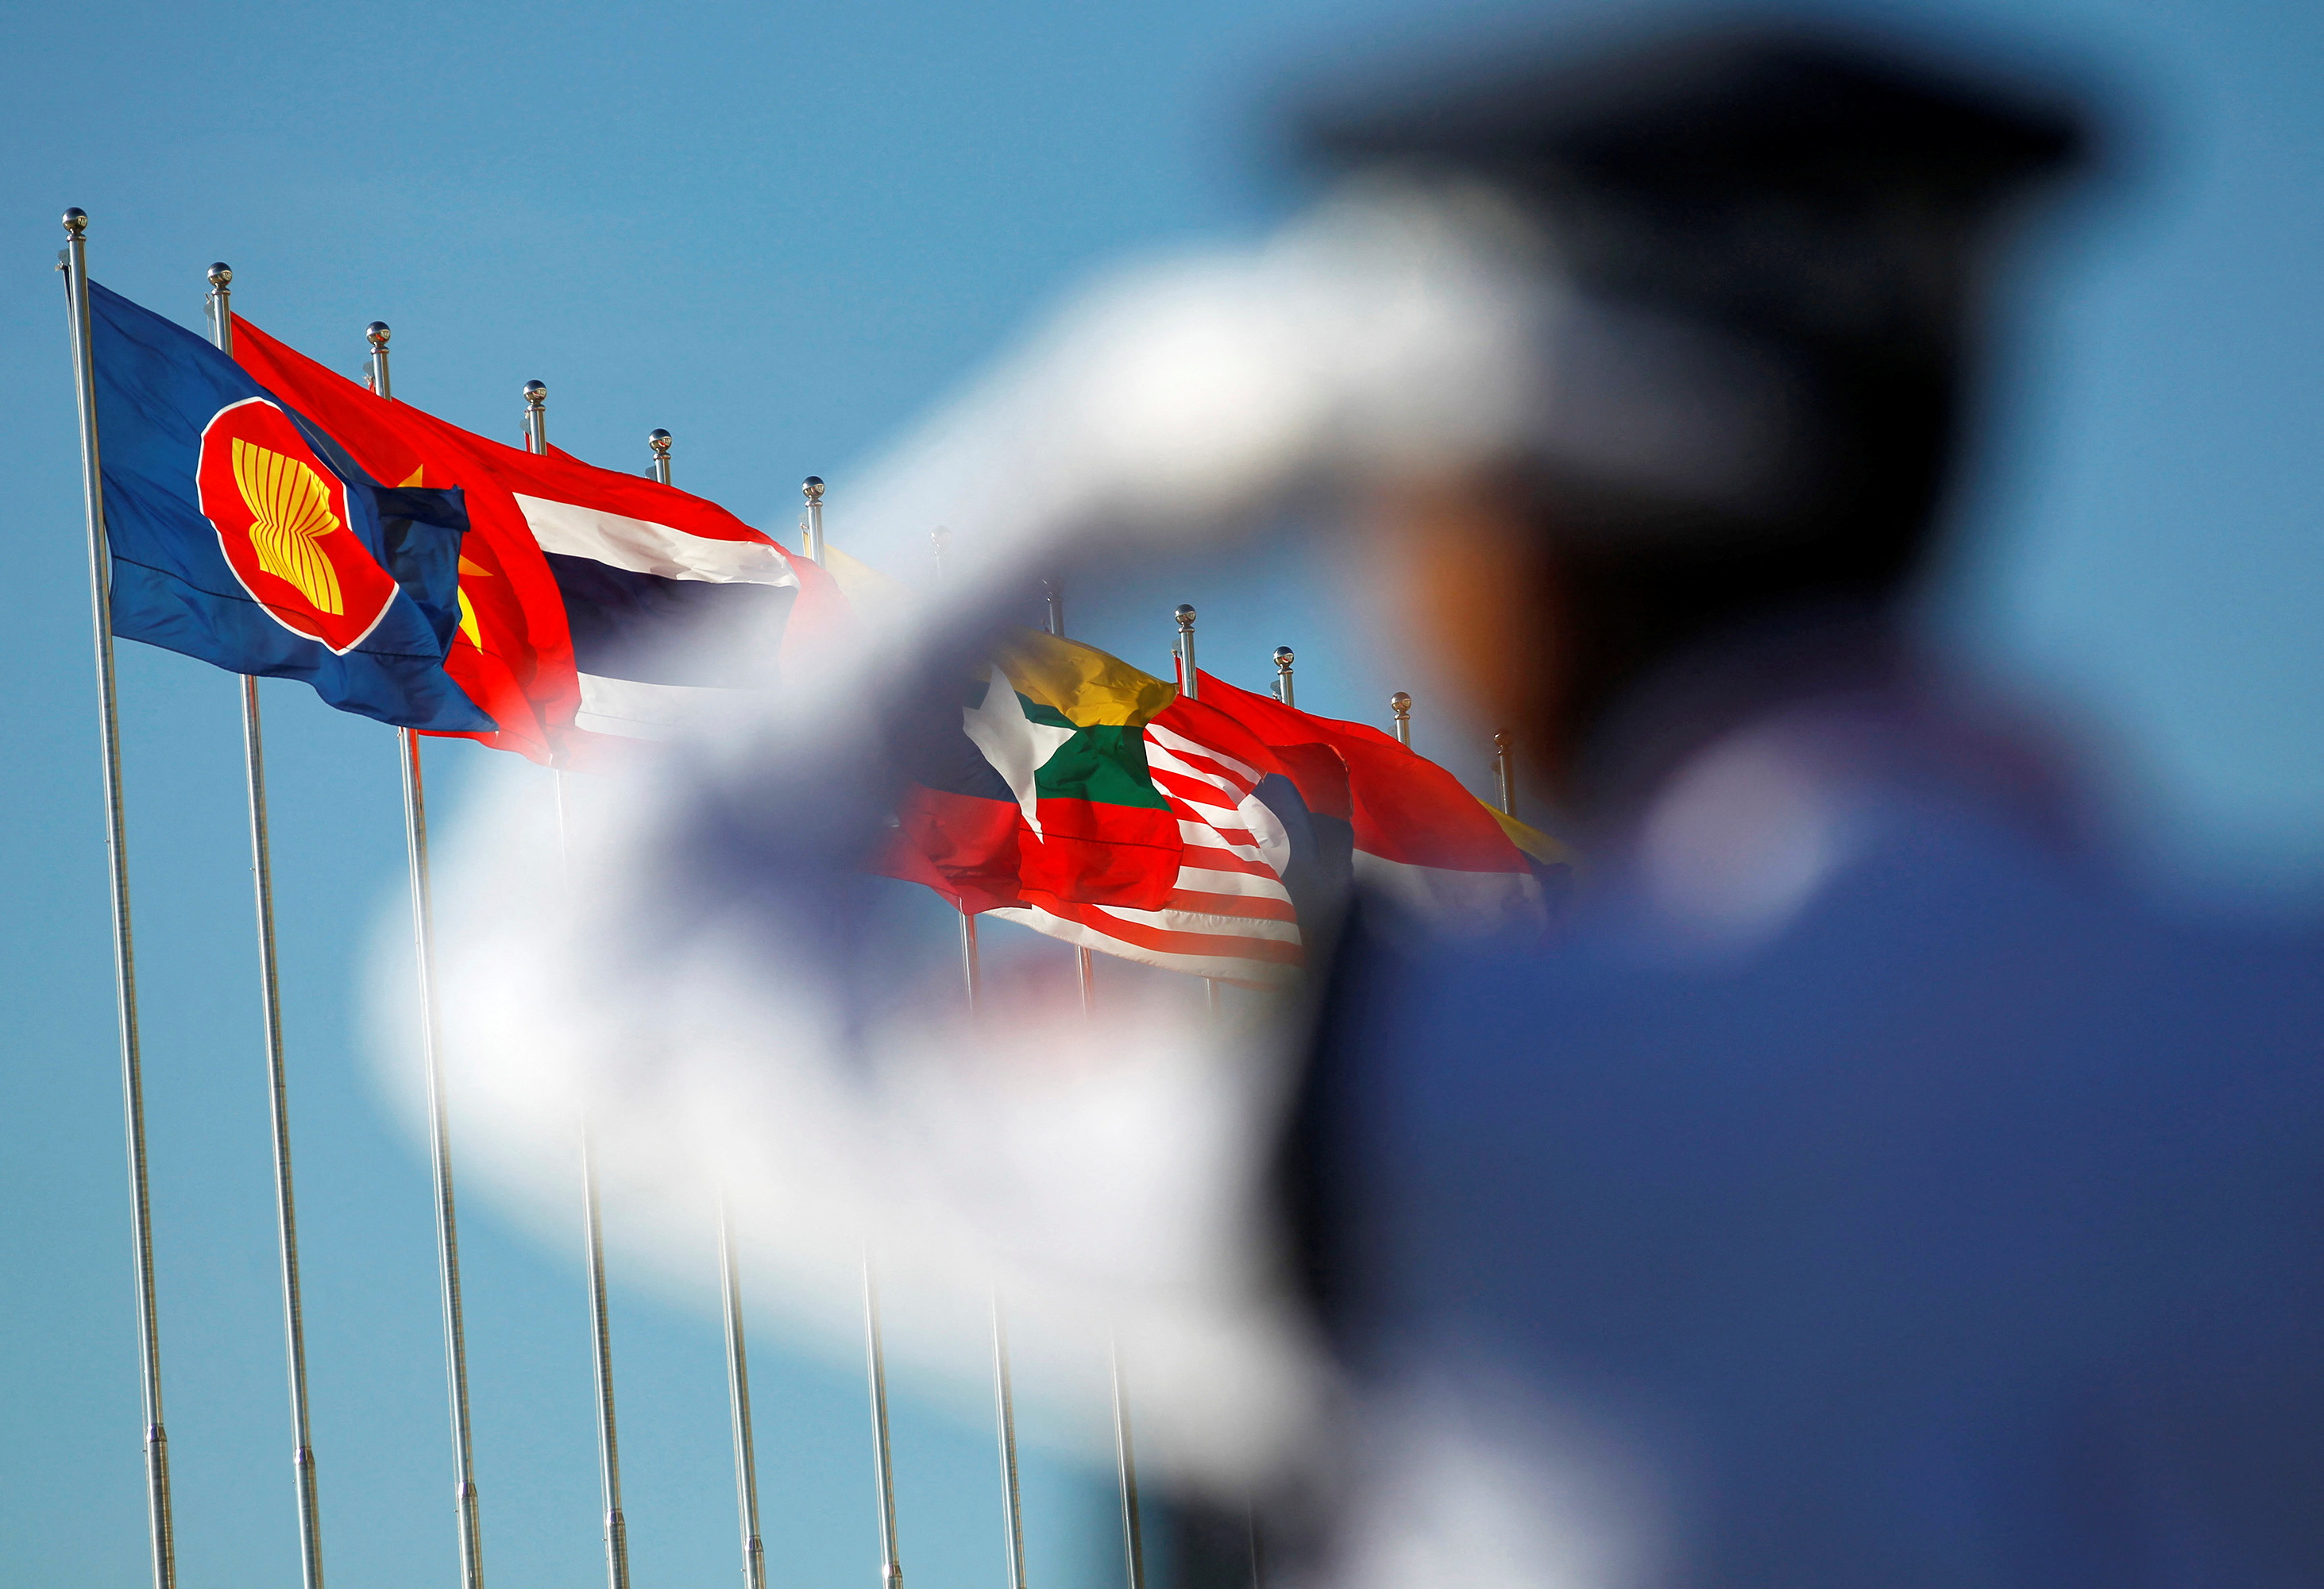 A police officer stands near national flags of ASEAN counties flags during 25th ASEAN Summit in Myanmar International Convention Centre in Naypyitaw